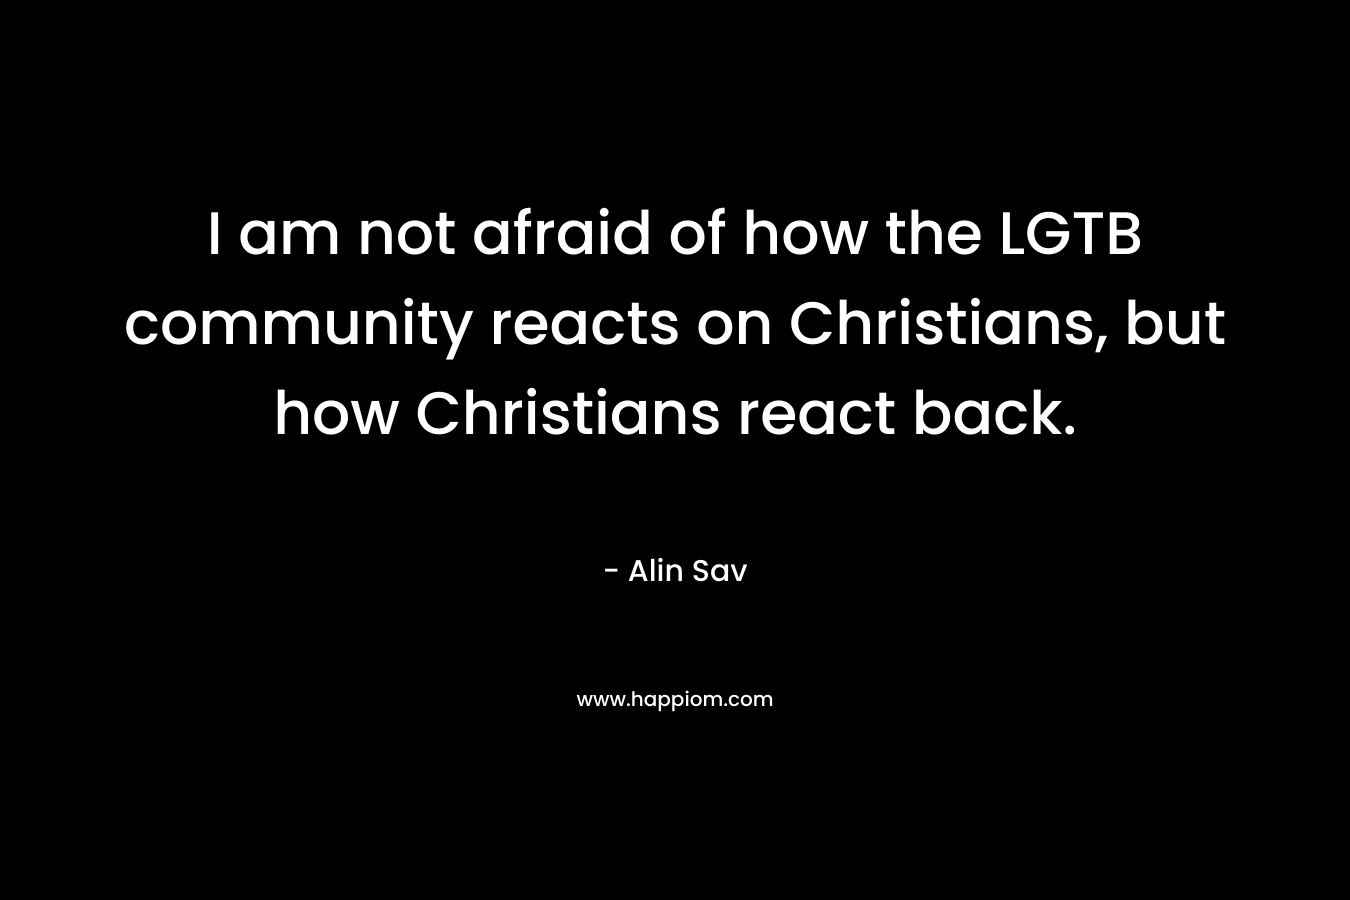 I am not afraid of how the LGTB community reacts on Christians, but how Christians react back.